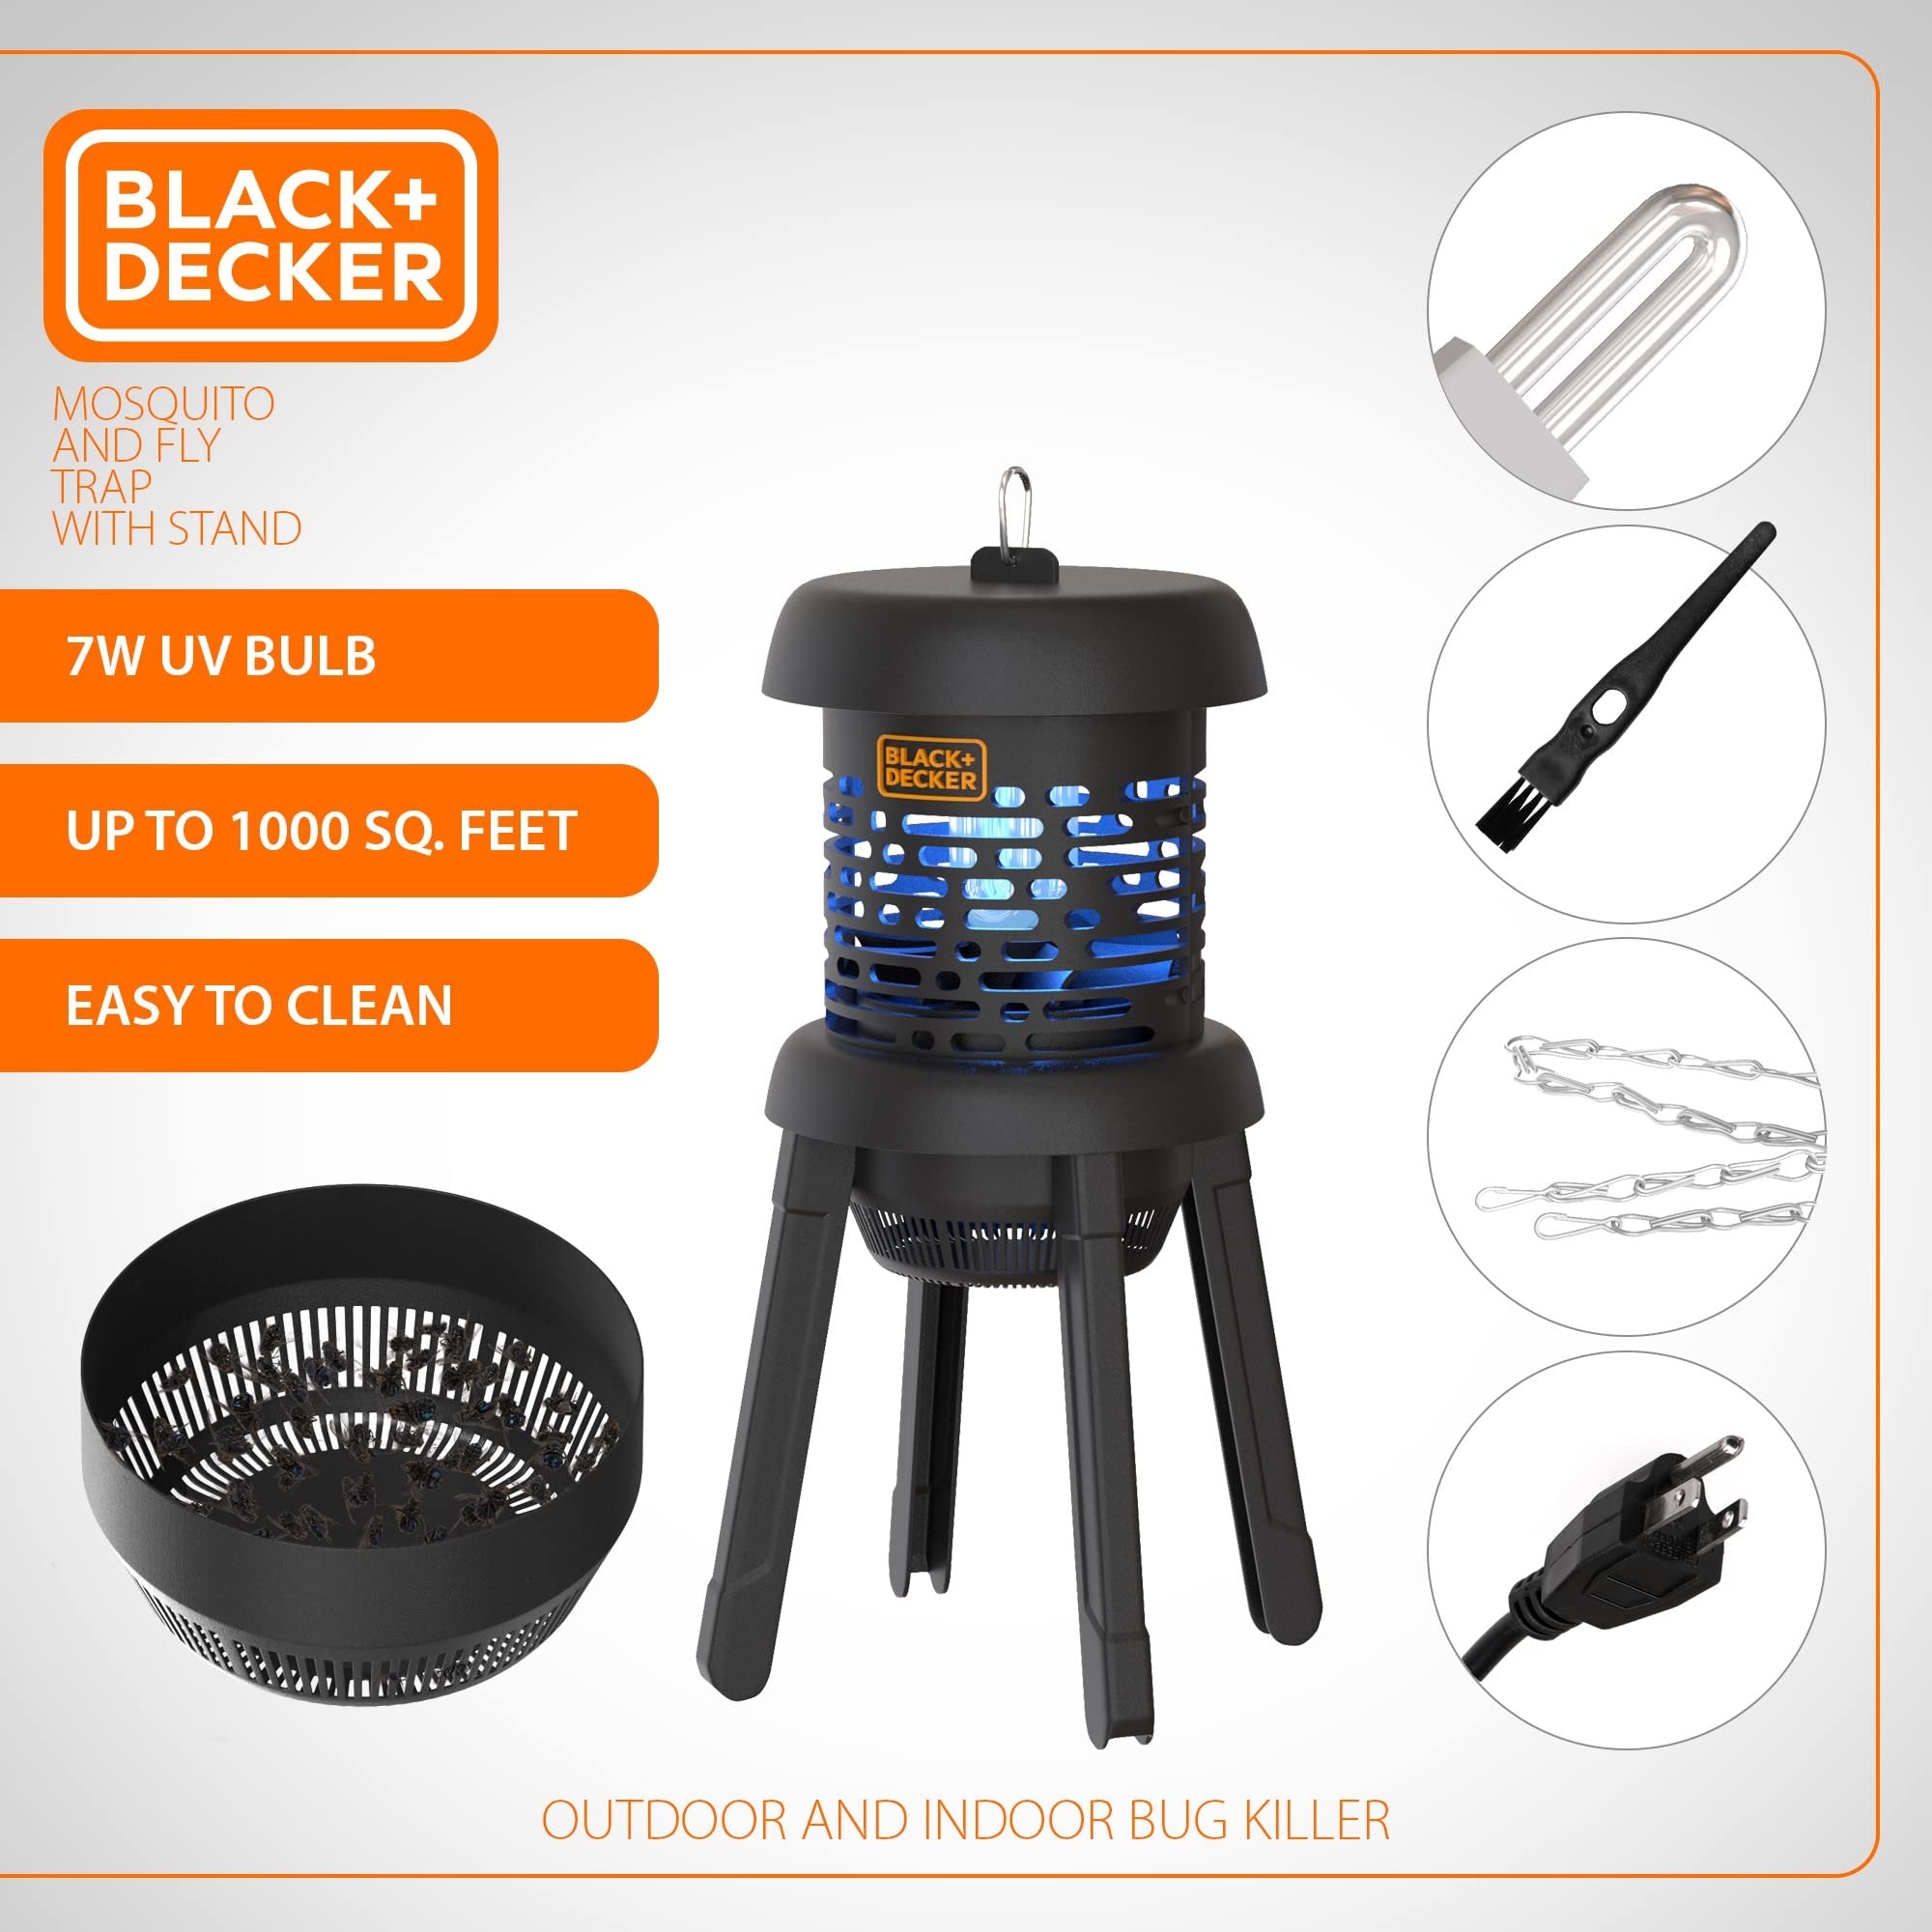 Black+Decker Fly Traps for Indoors- Fruit Fly & Mosquito Trap- Bug Catcher & Mosquito Killer- 3 Way Gnat & Moth Trap with Stand- Bright UV Light Attractant Fan for Outdoors